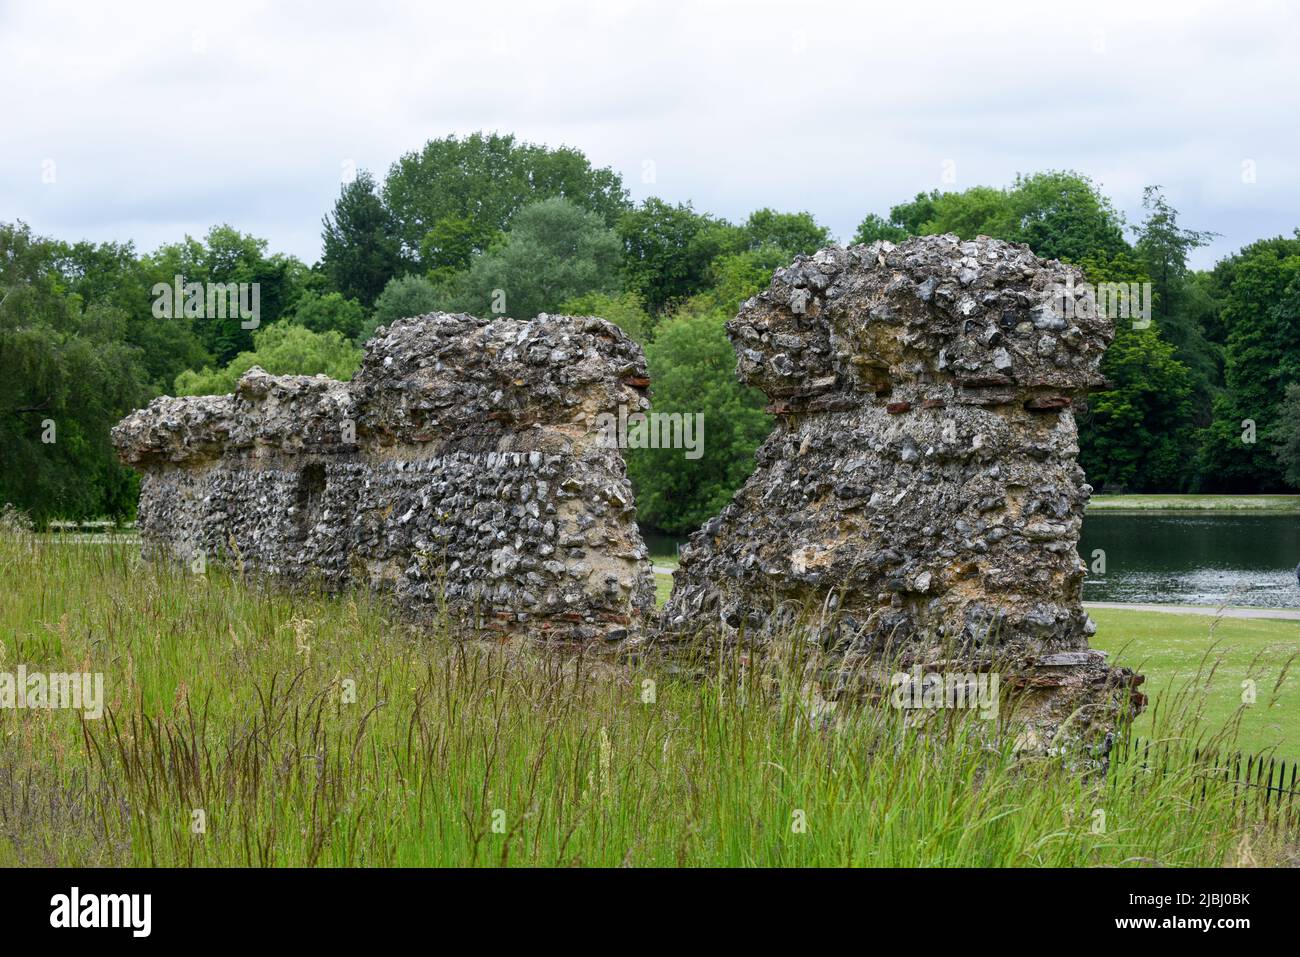 Roman architecture remains preserved in Verulamium Park in St Albans England Stock Photo